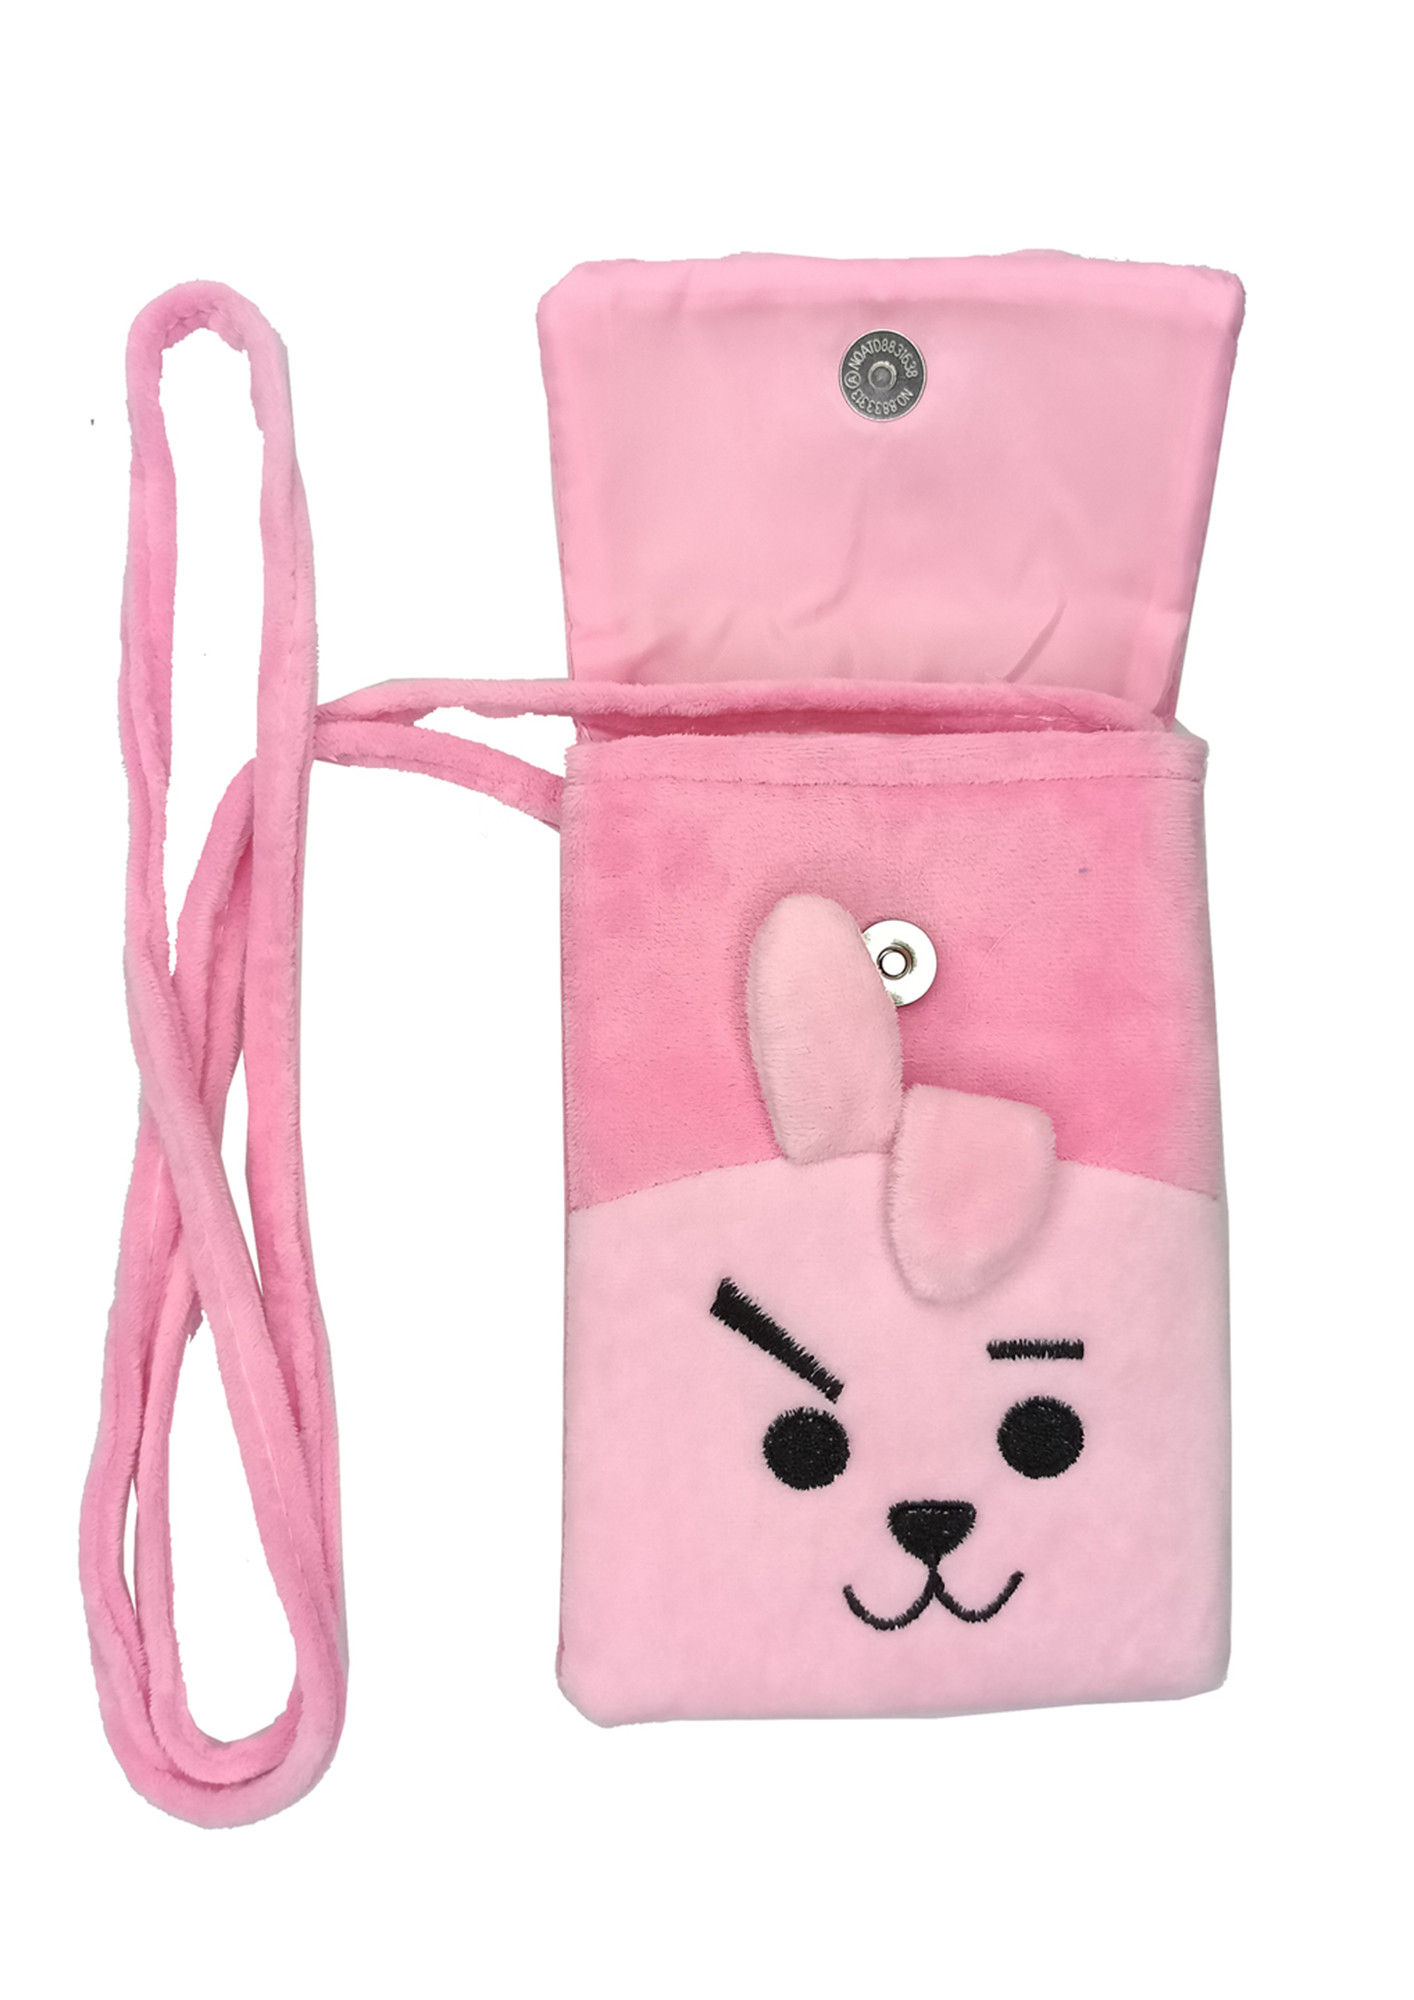 Kpop BTS Merchandise Canvas Shoulder Bag, Hobo Crossbody Handbag Casual  Tote for Army Gifts Pink : Clothing, Shoes & Jewelry - Amazon.com